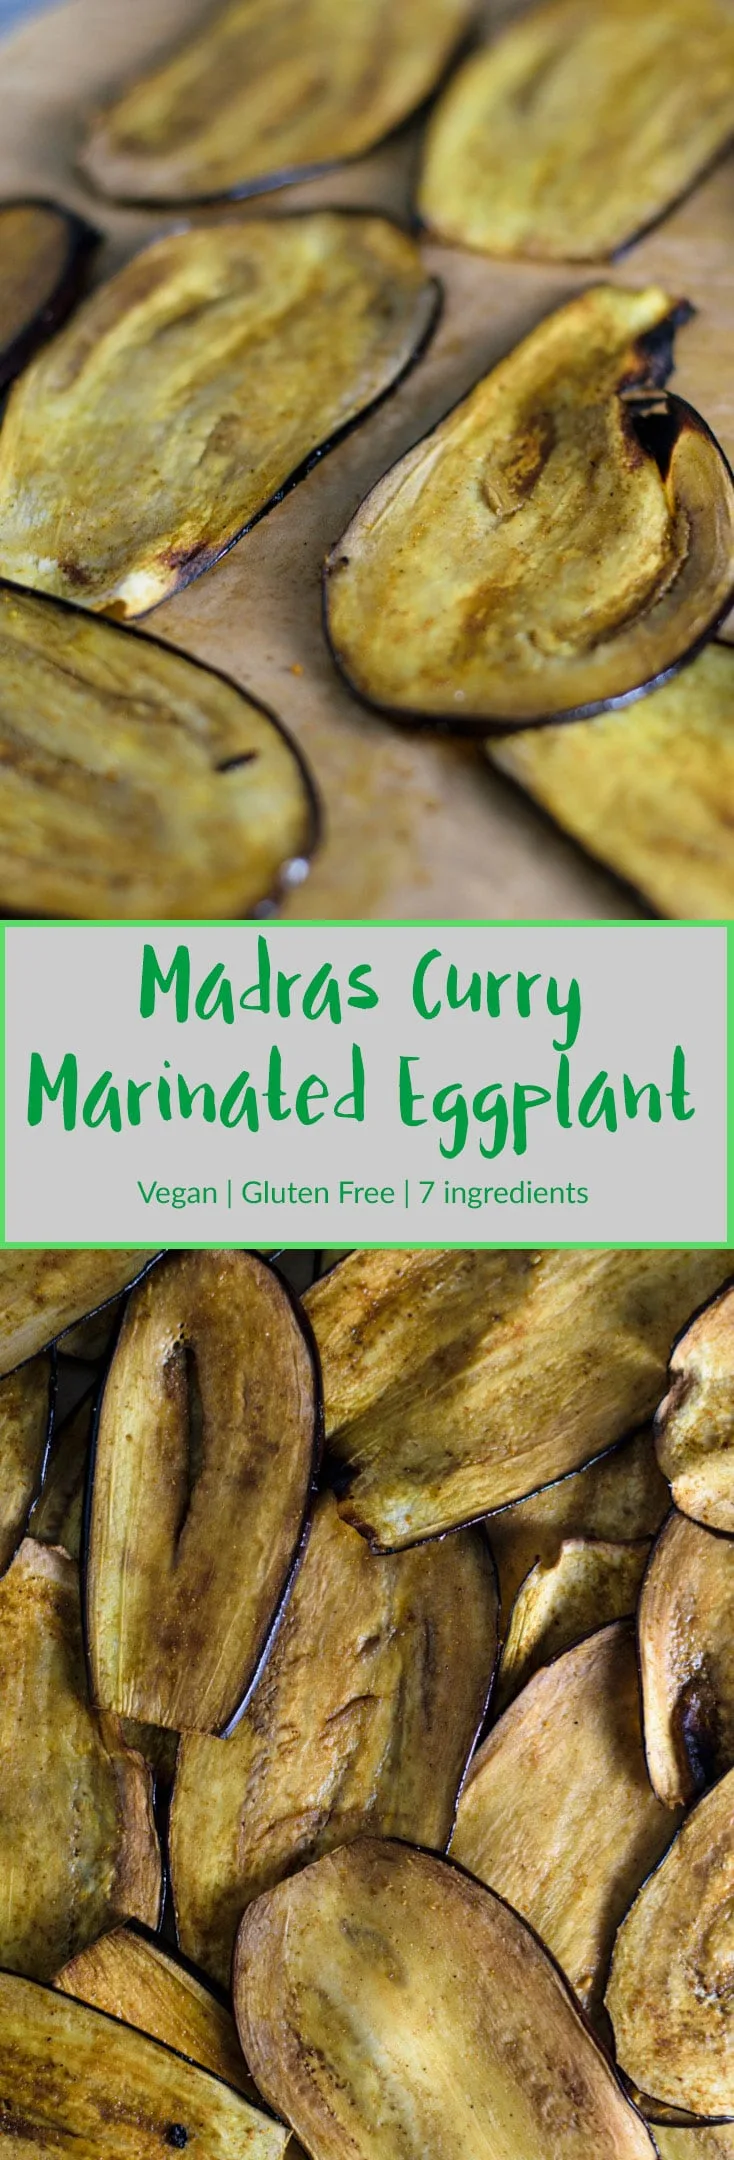 Madras Curry Marinated Eggplant | Vegan, gluten free, and only 7 ingredients. Thinly sliced eggplant is rubbed with a curry marinade and roasted for a deliciously chewy, ultra flavorful result. Perfect for eating with rice, in sandwiches, salads, and more! | thecuriouschickpea.com #vegan #curry